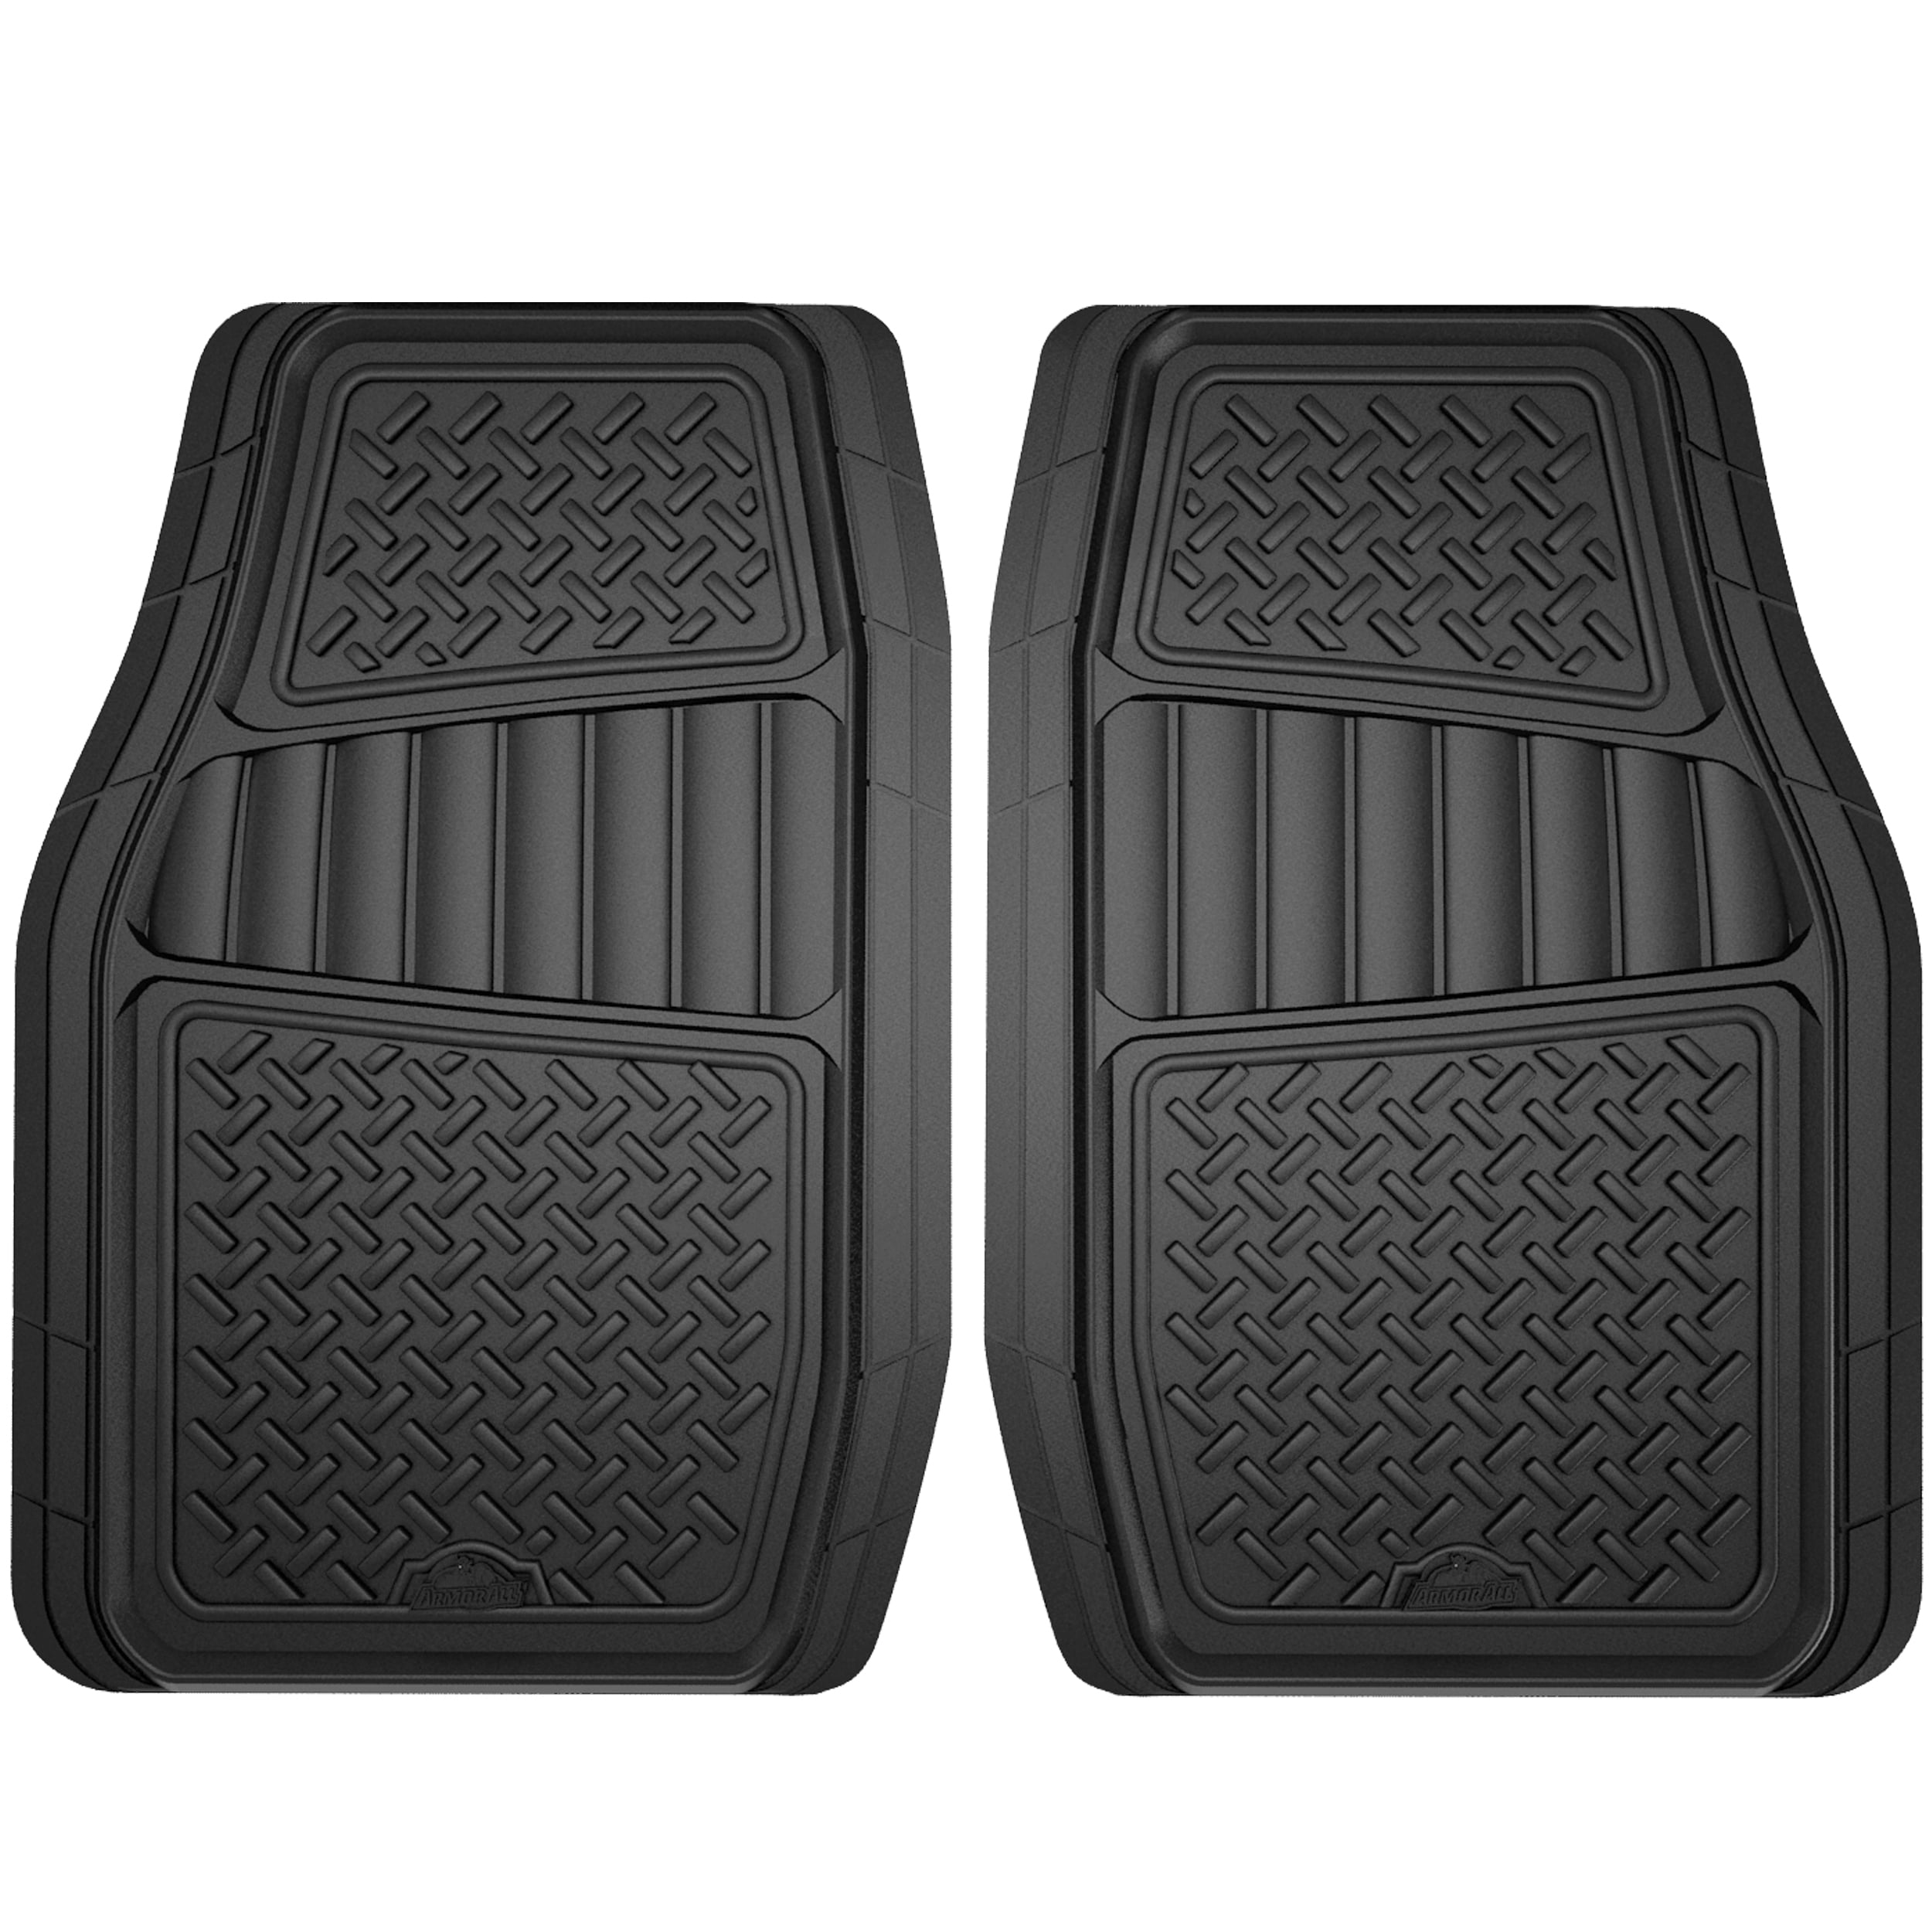 Armor All 78919 Heavy-Duty Rubber Trunk Cargo Liner Floor Mat Trim-to-Fit  for Car, SUV, SUV and Trucks, Black